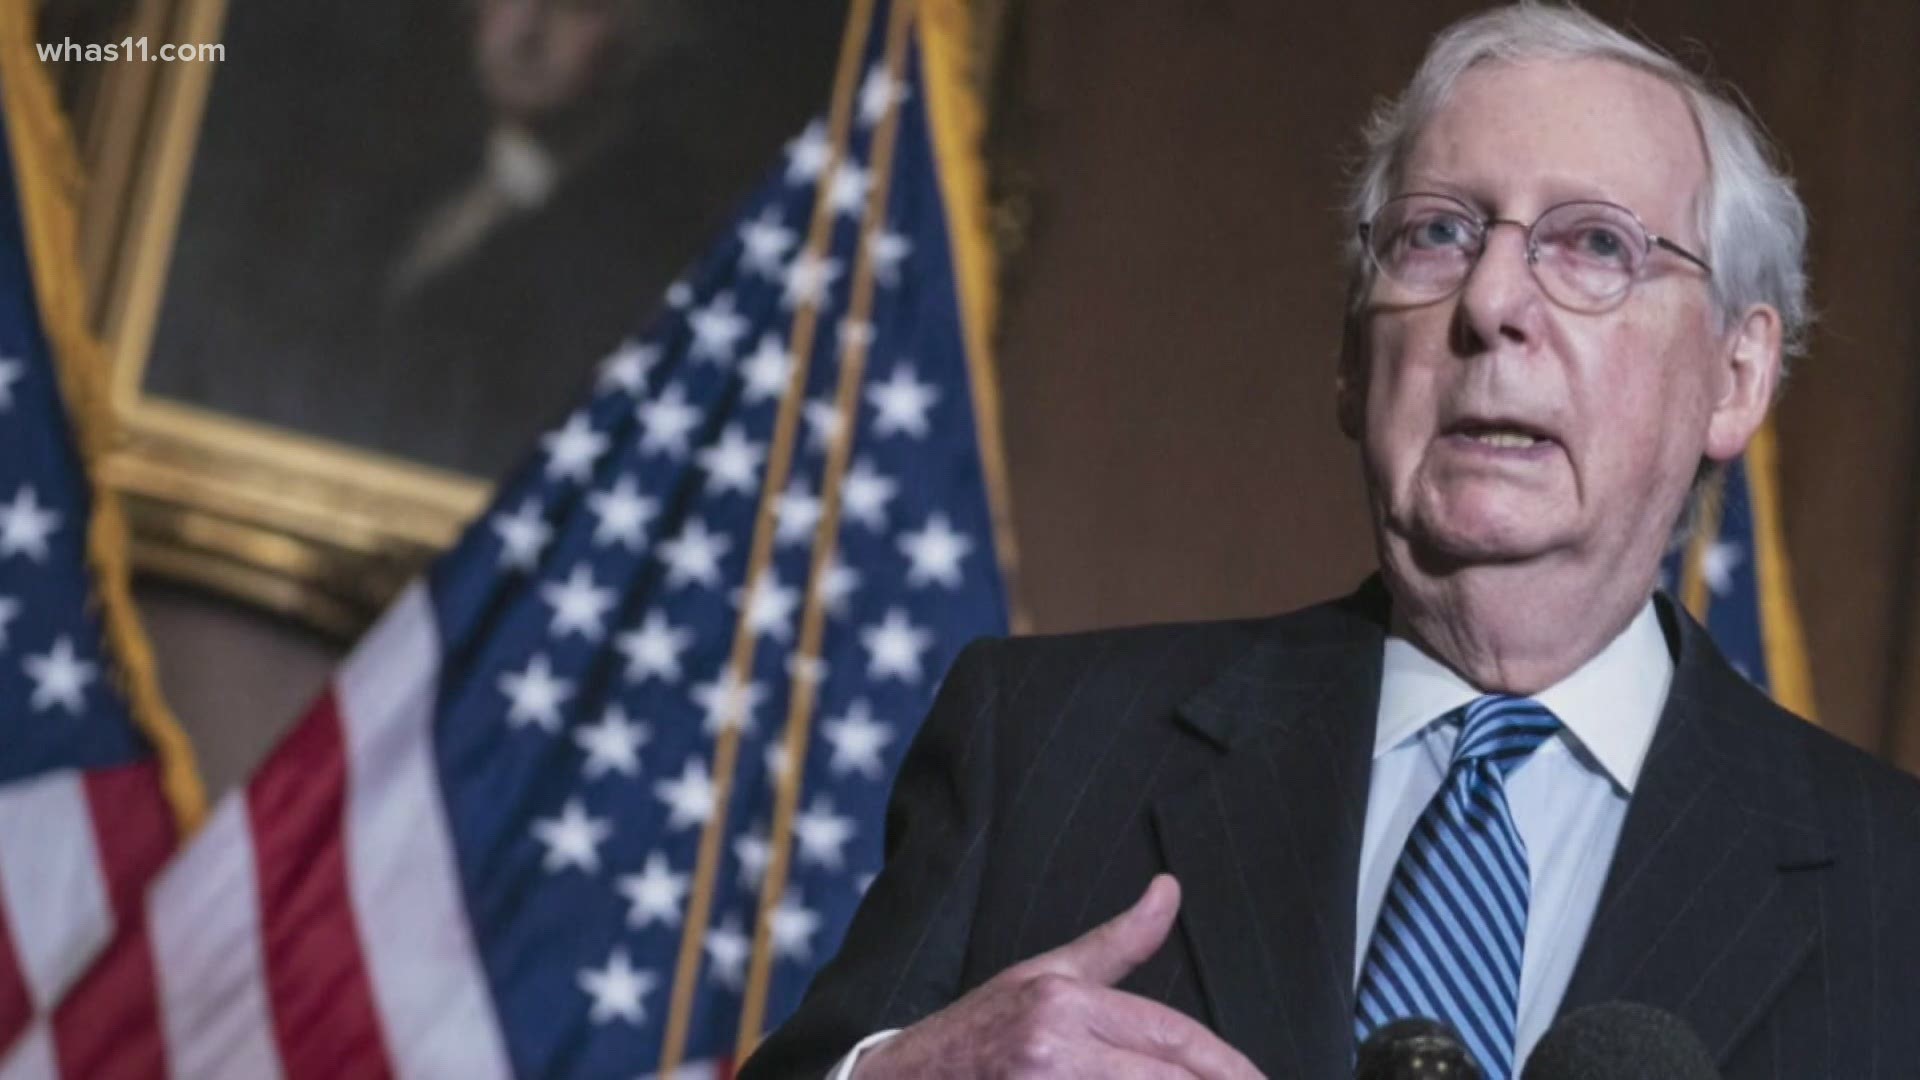 Senator Mitch McConnell condemned President Donald Trump for inciting violence at the Capitol.